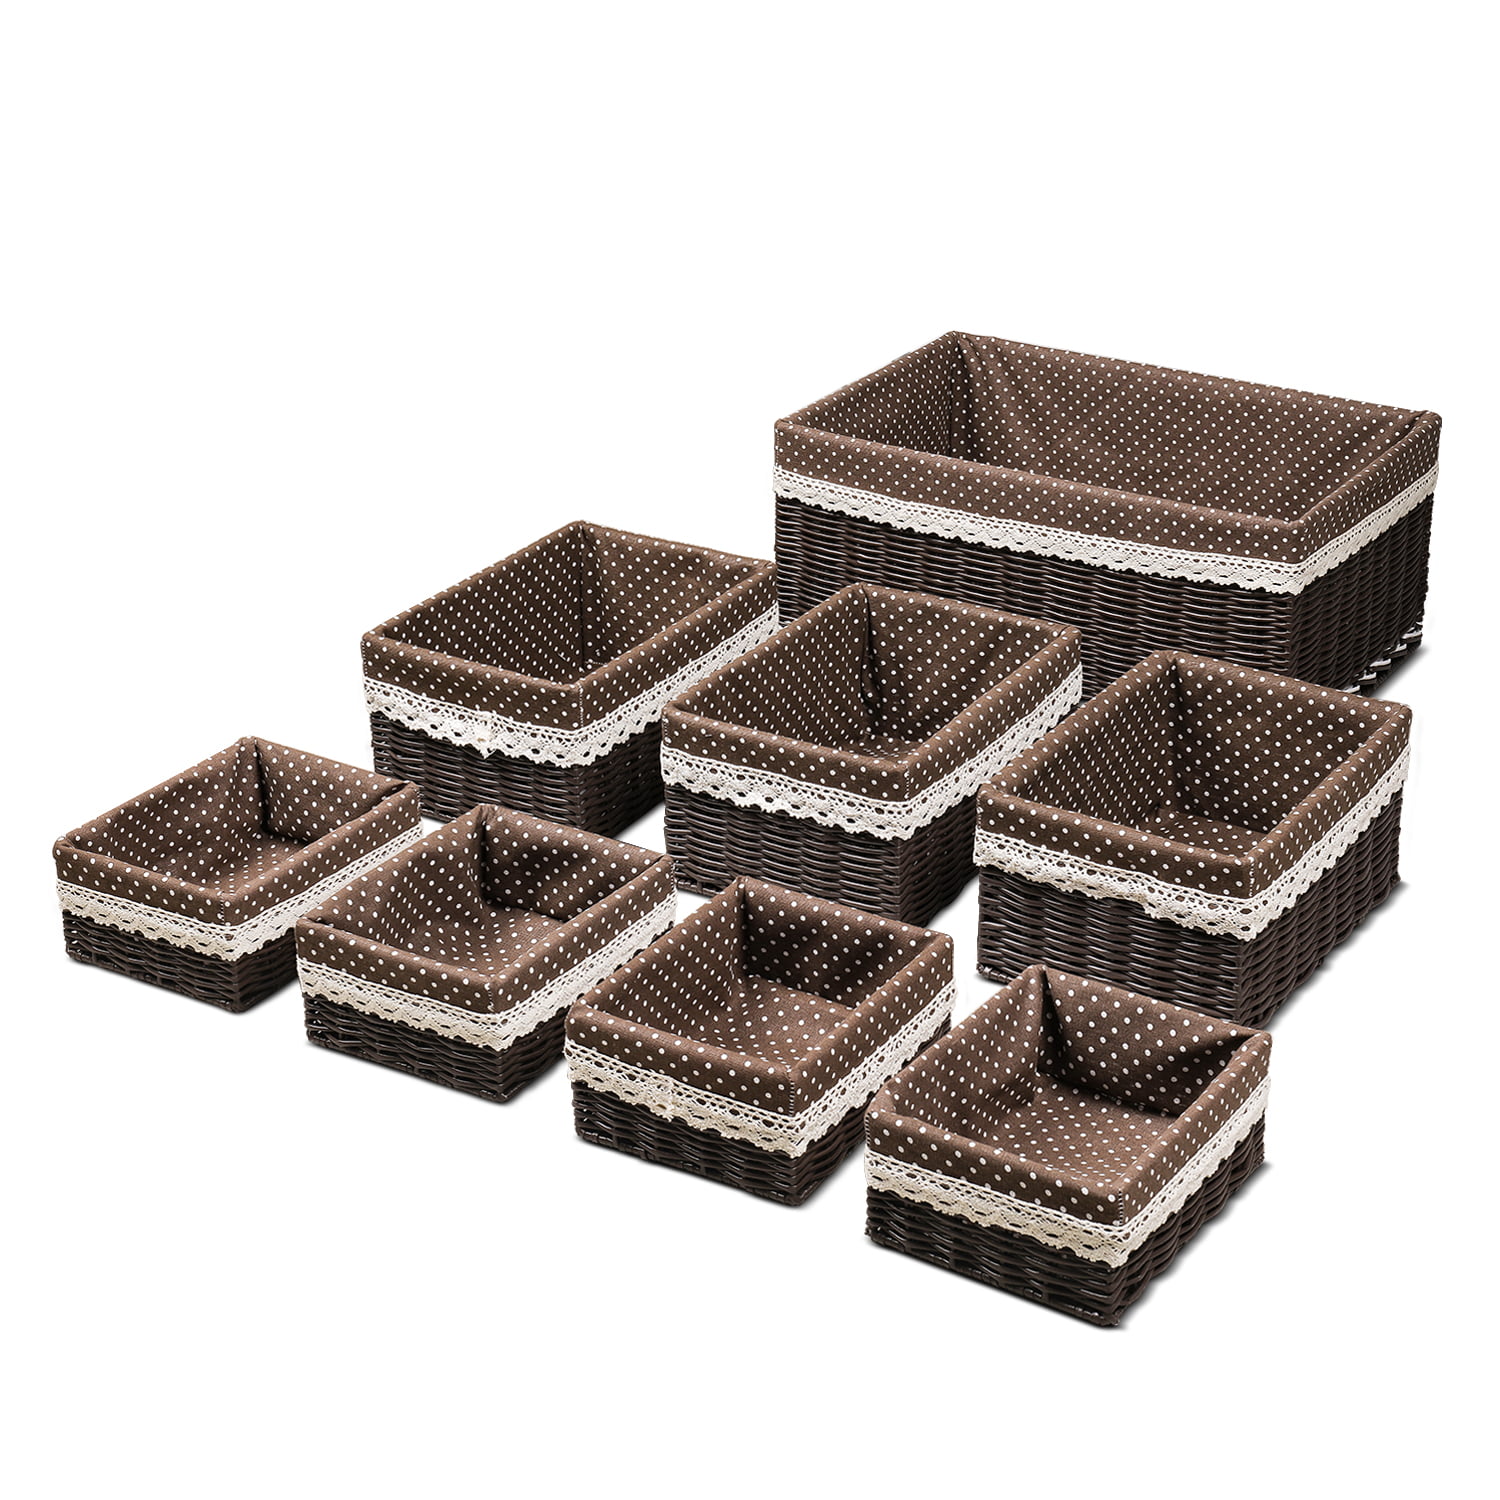 Storage Baskets Woven With Liner, Woven Bathroom Storage Baskets